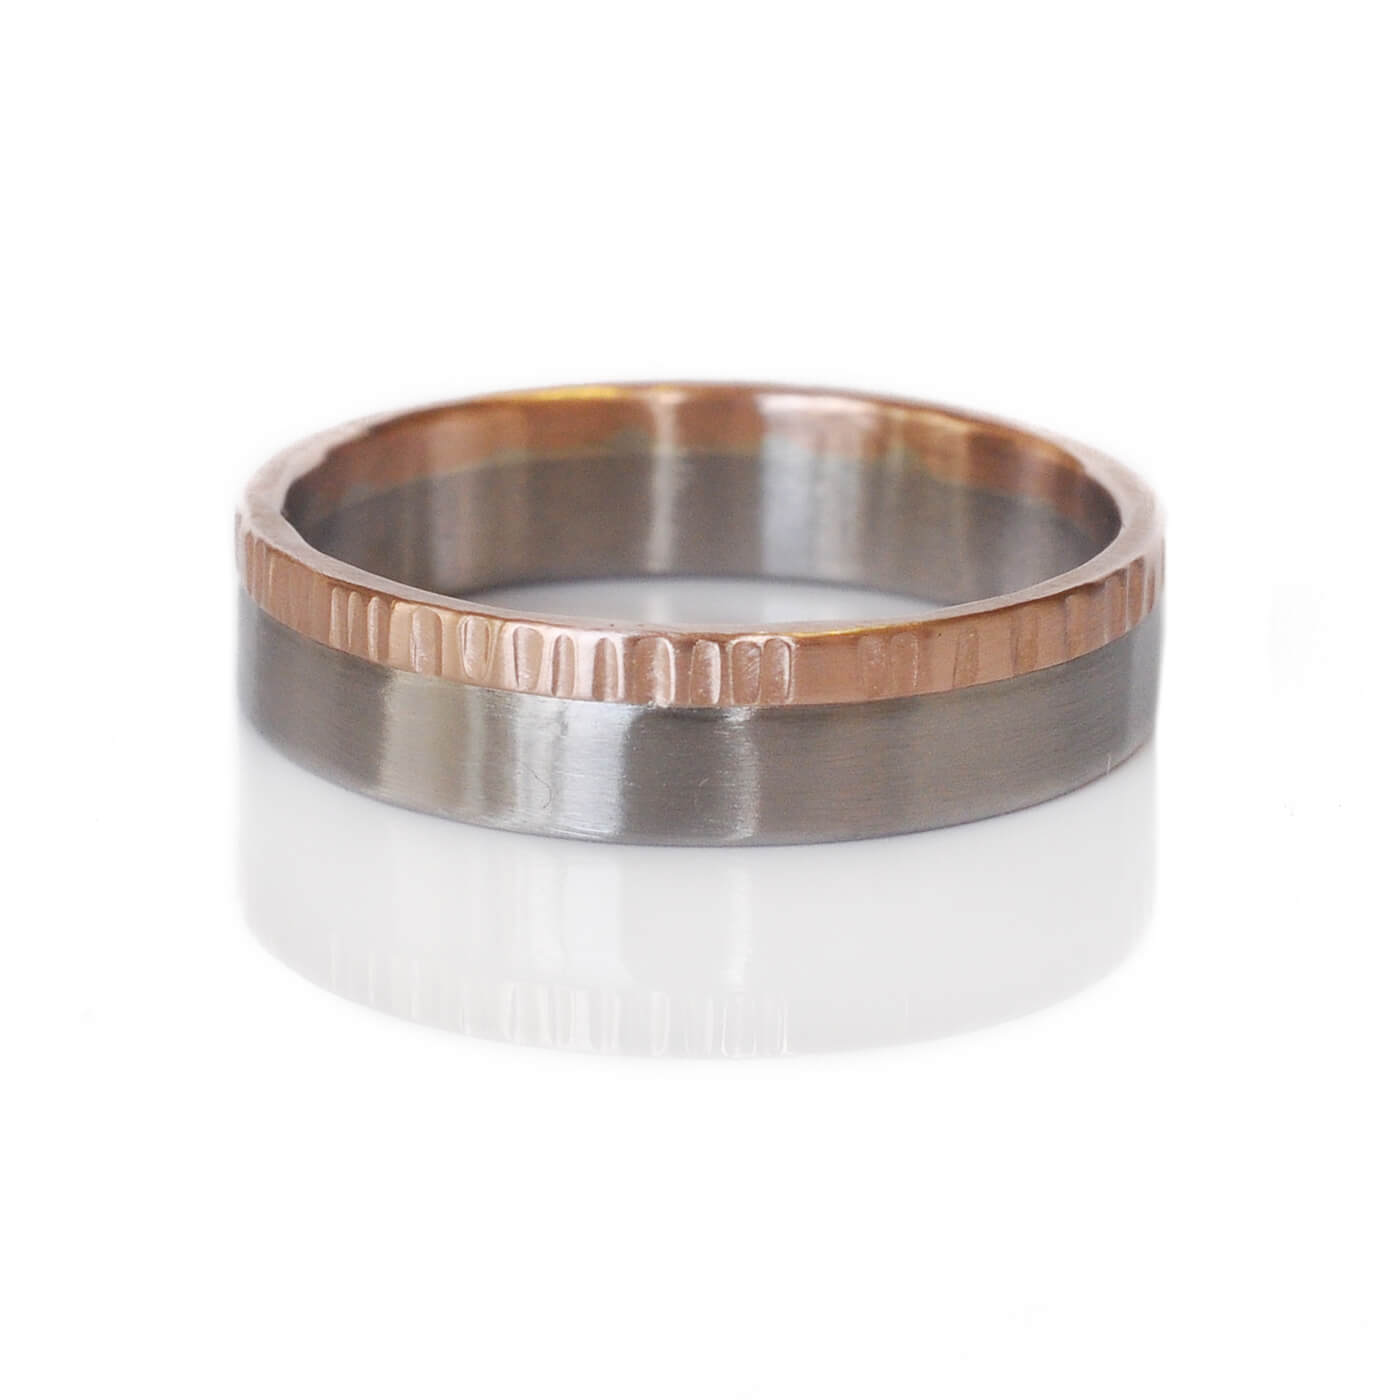 Handmade red gold and palladium wedding band. Made in Minneapolis, MN by EC Design Jewelry using recycled metal.